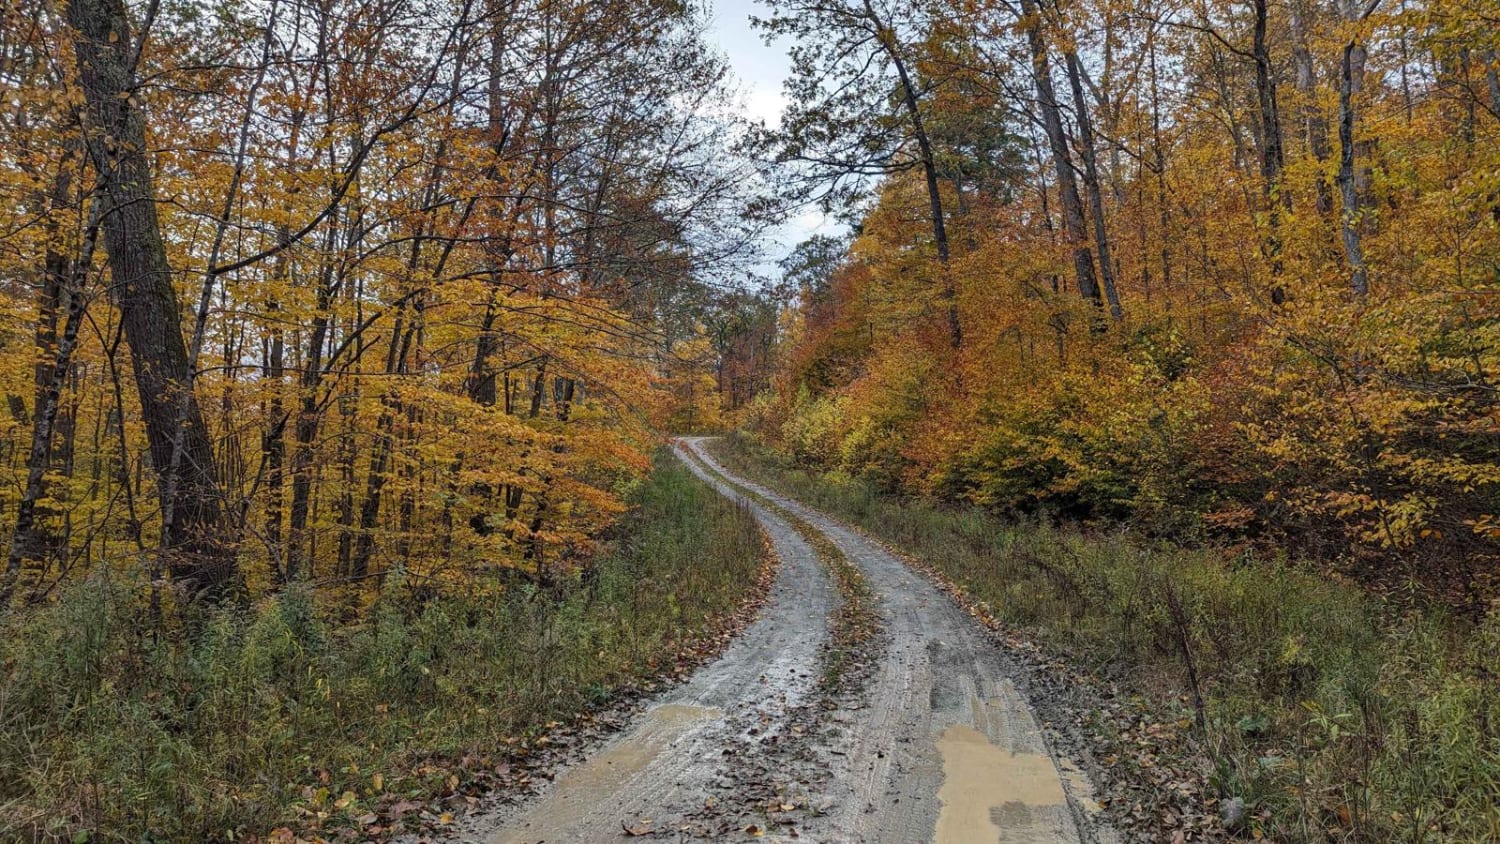 Cowdry Hollow to Comstock Hollow Road